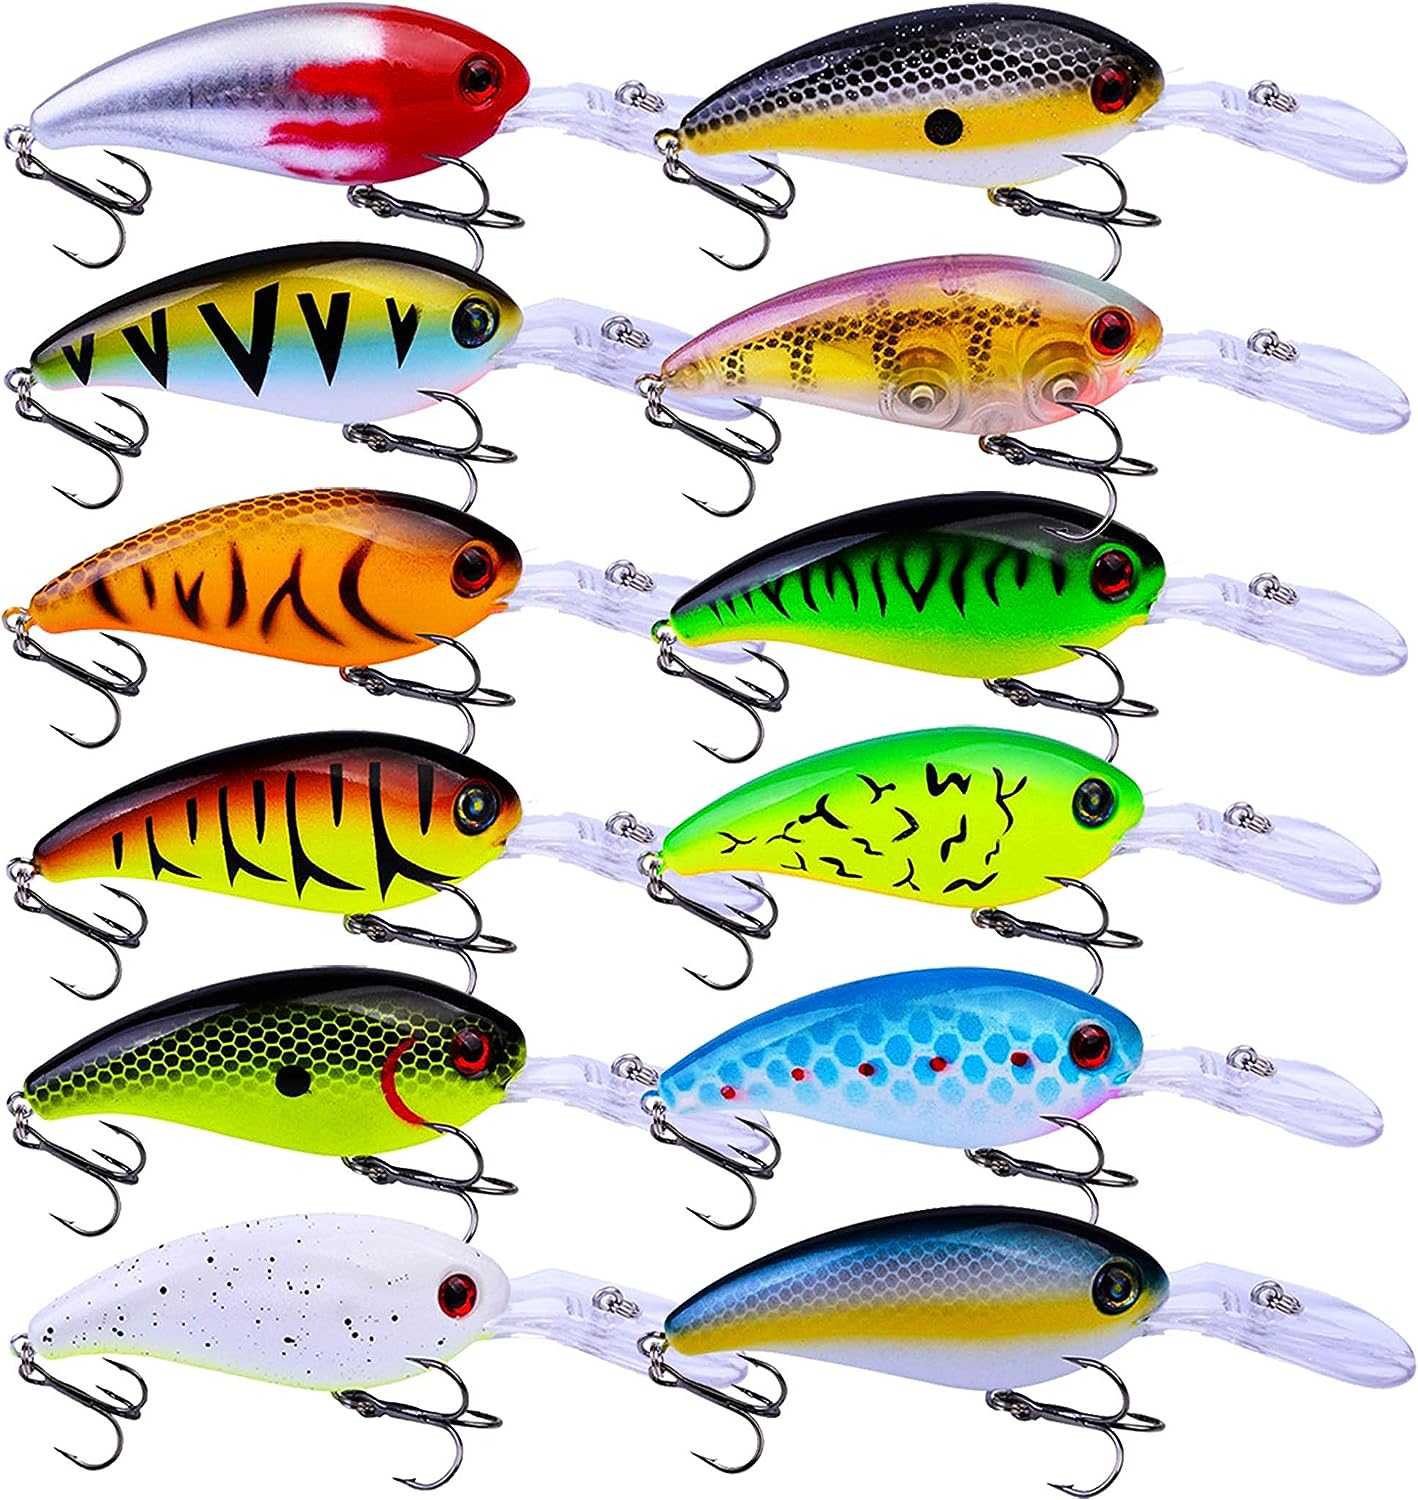 An image of a vibrant crankbait, which is highly effective in reaching deeper water depths.